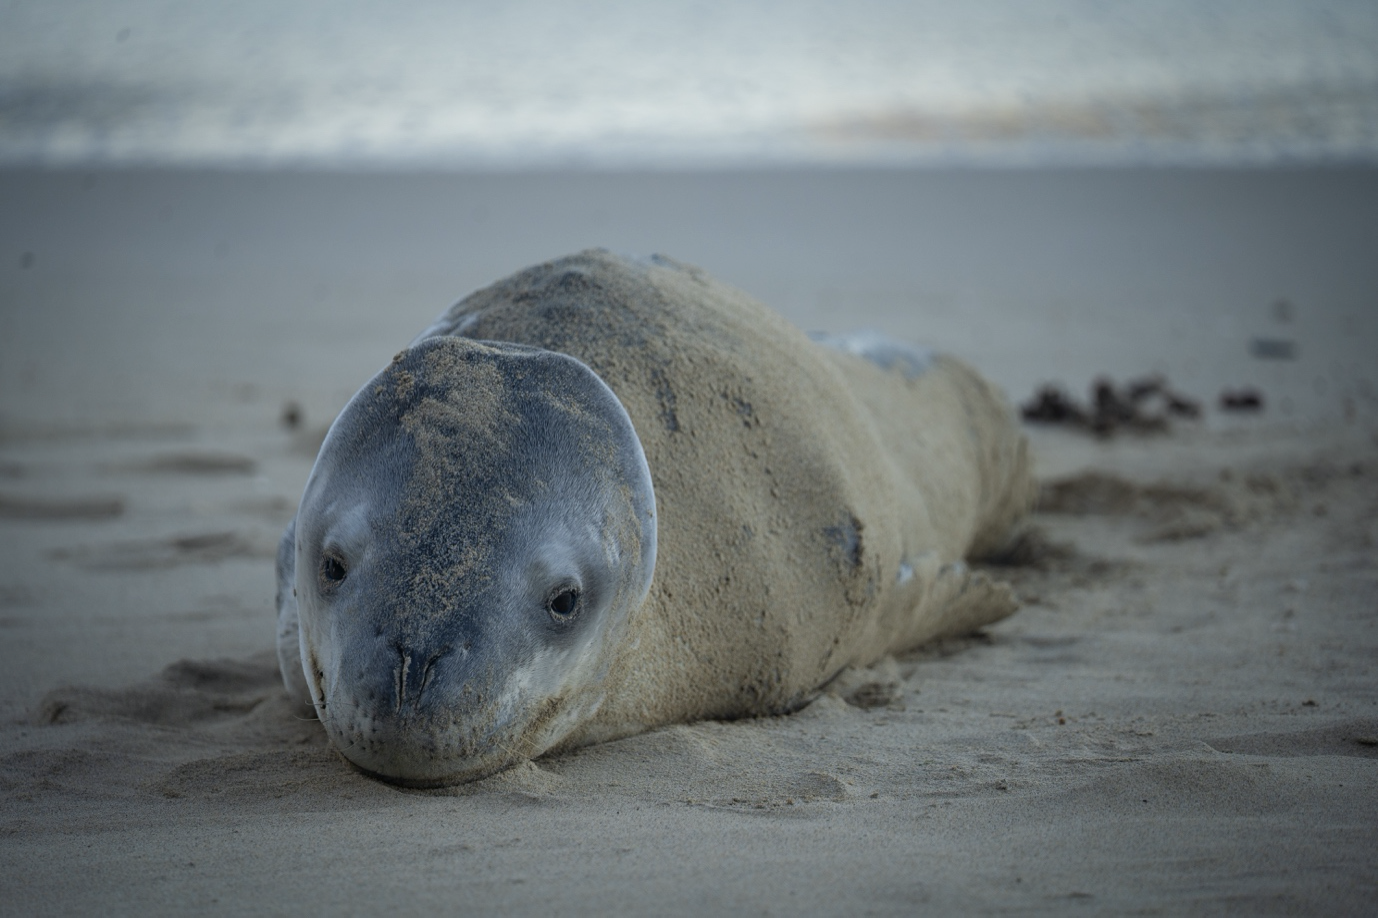 Leopard Seal spotted at Ned’s Beach, Lord Howe Island. Image by Molly Johnson.